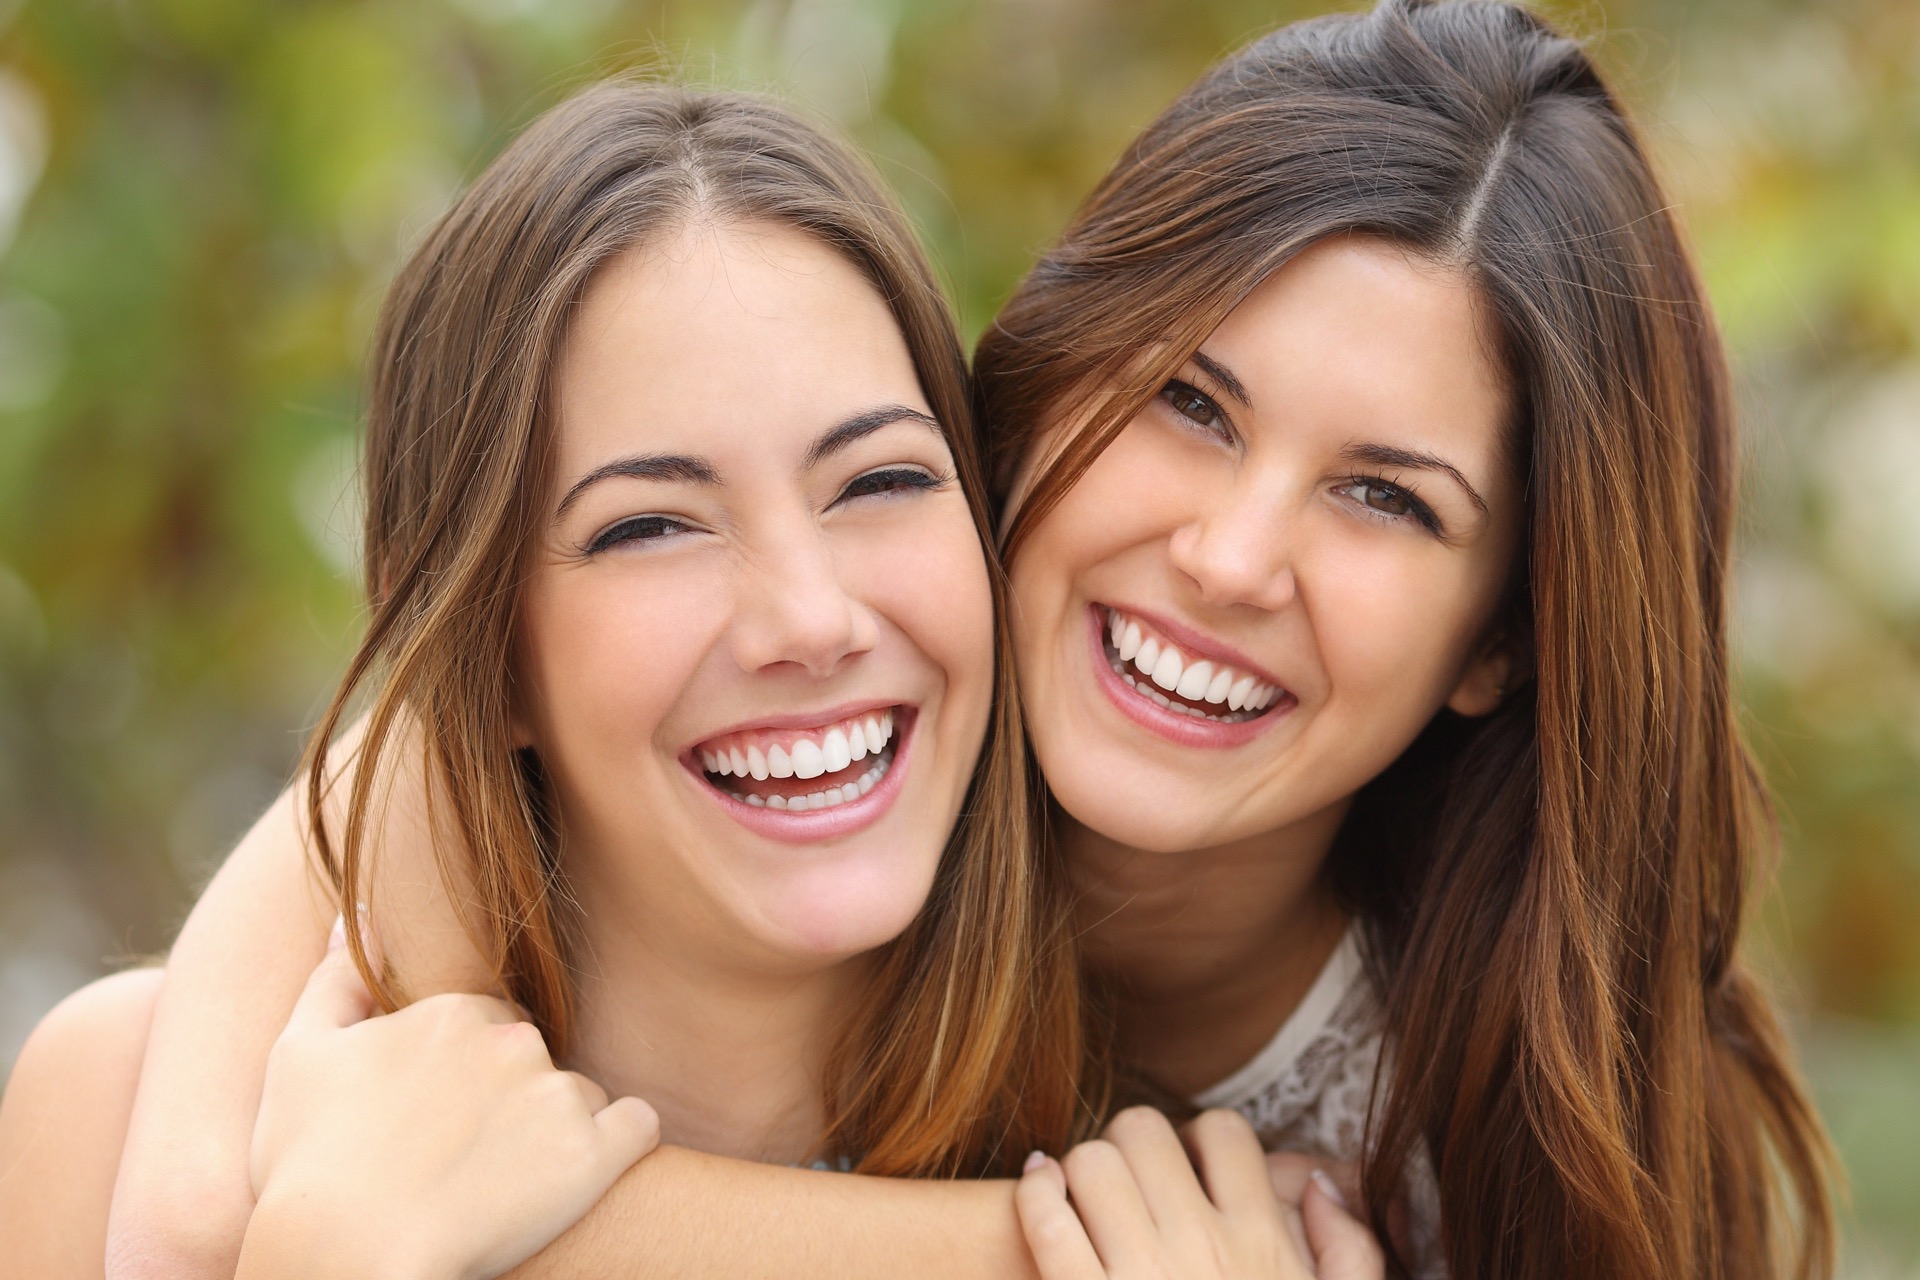 Two young women smiling after getting aesthetic dentistry done